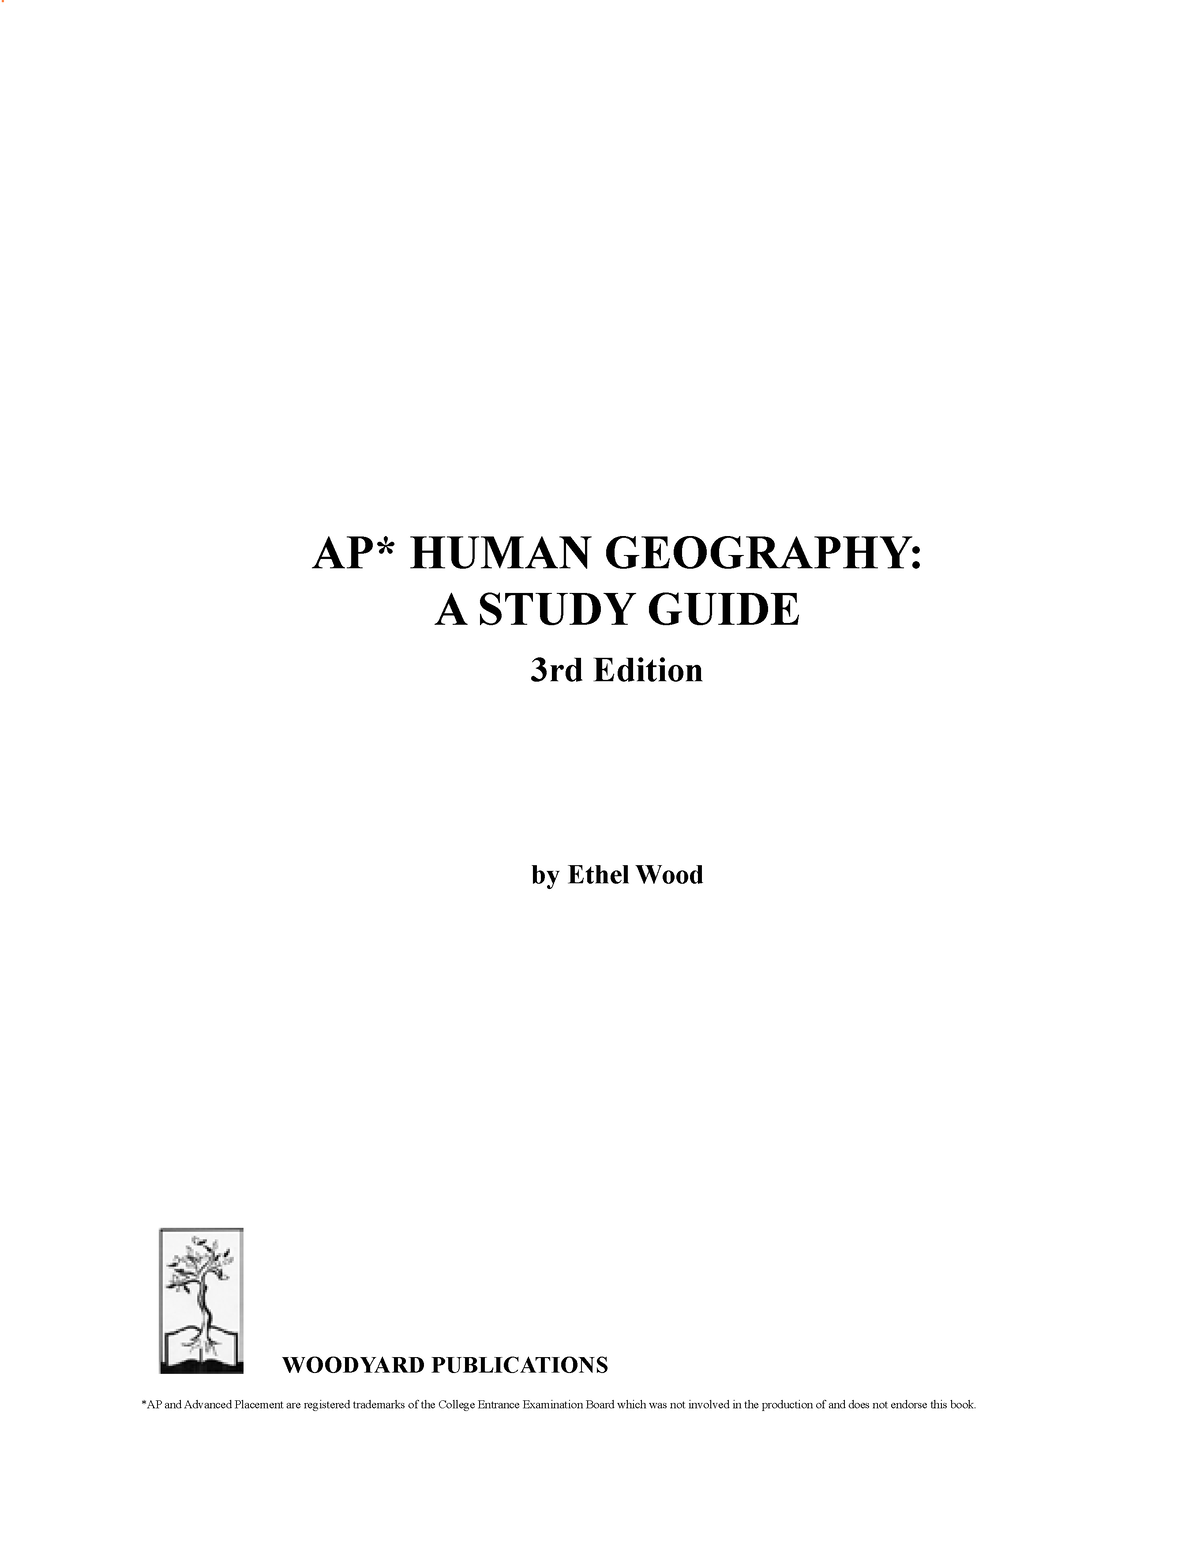 case study ap human geography example